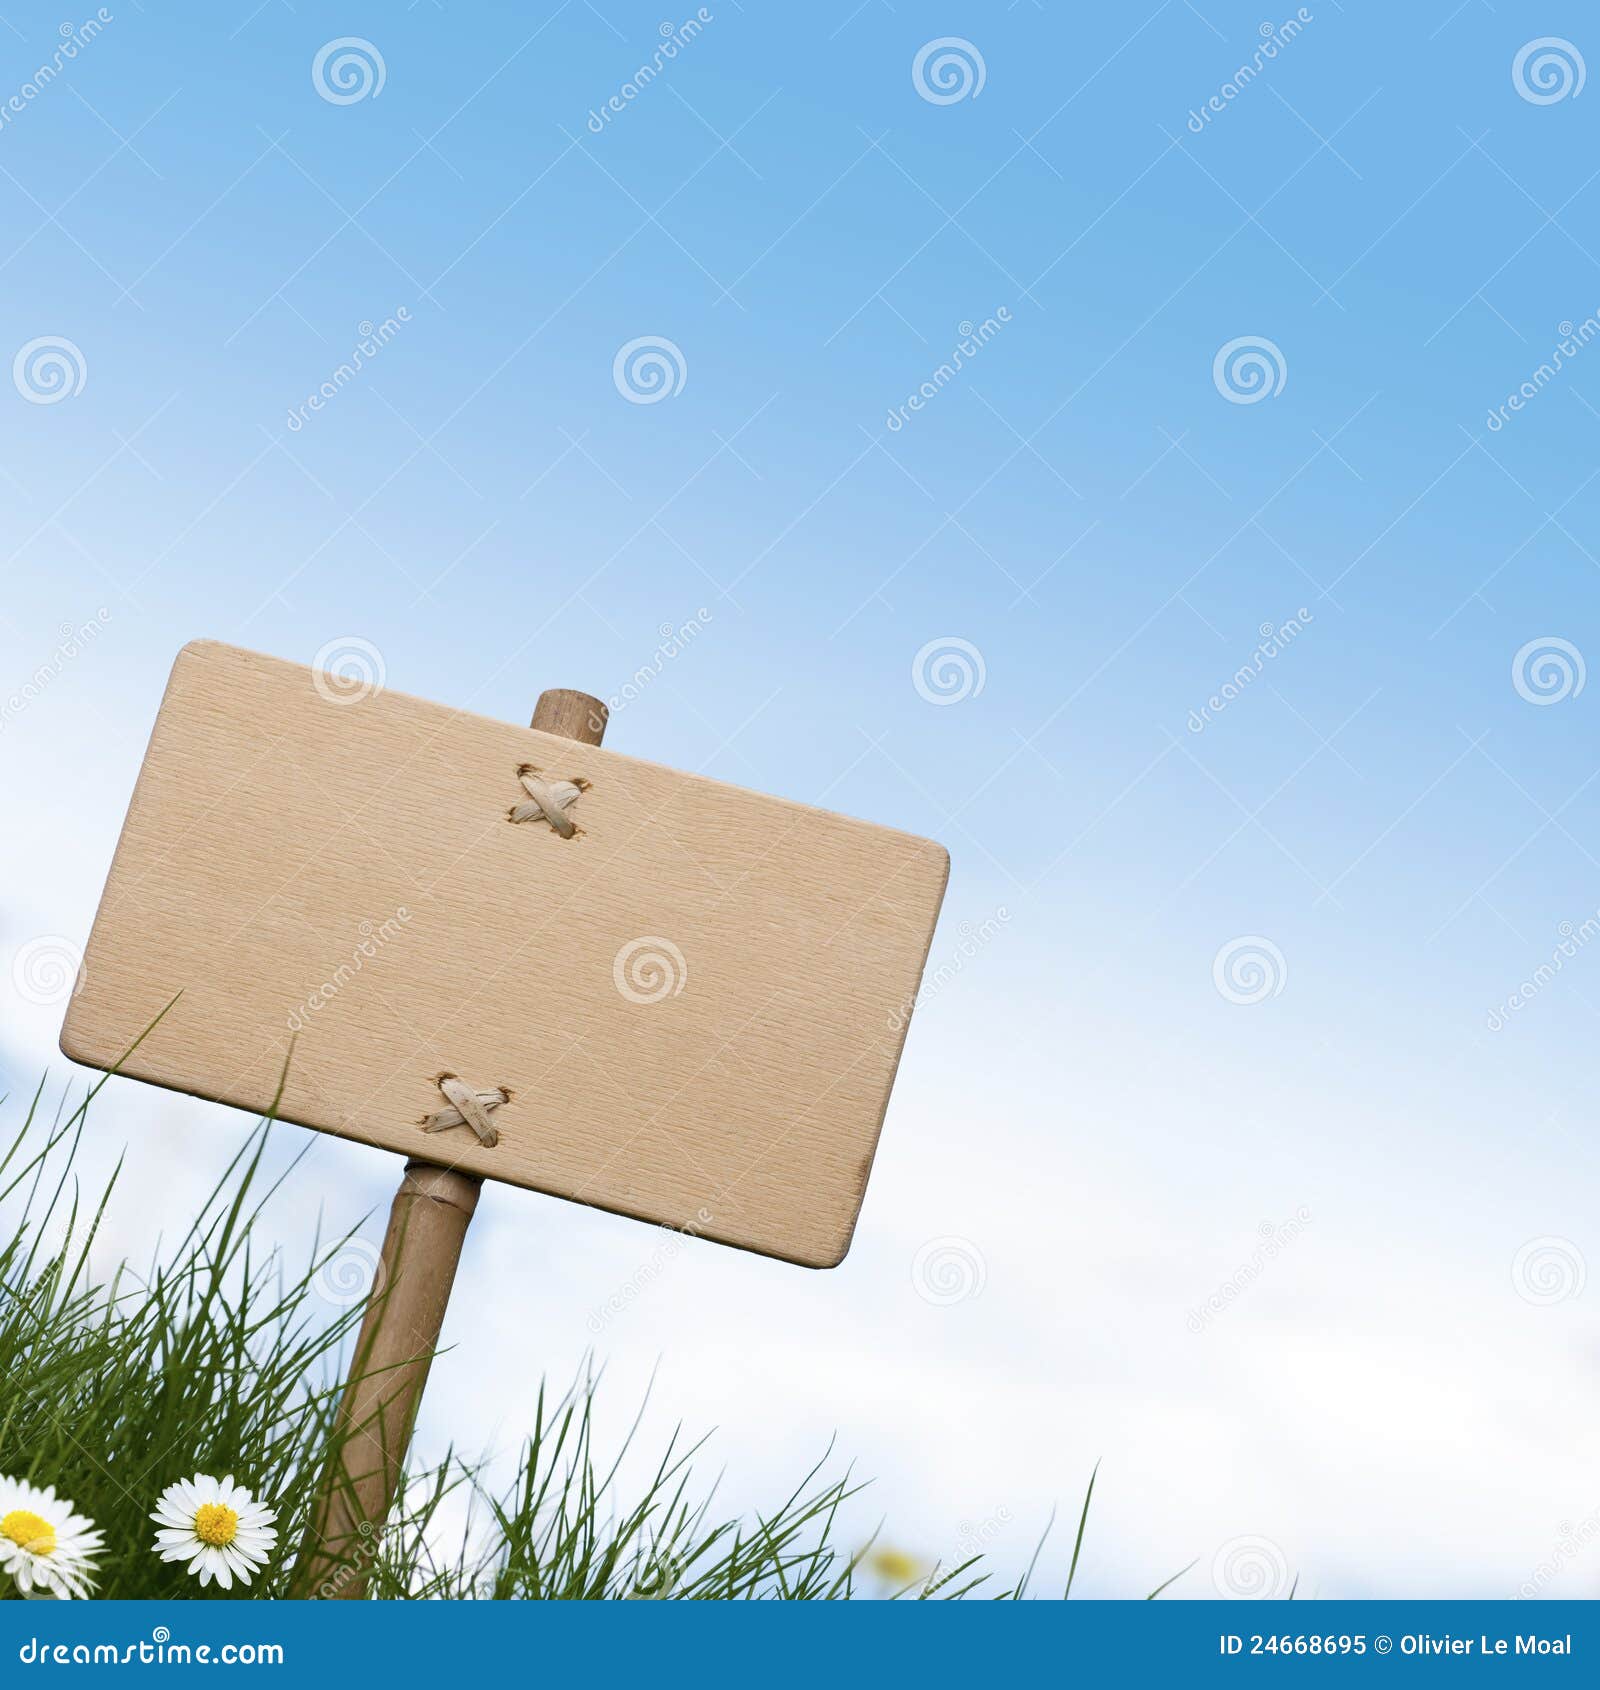 Blank wooden sign stock image. Image of message, backdrop - 24668695